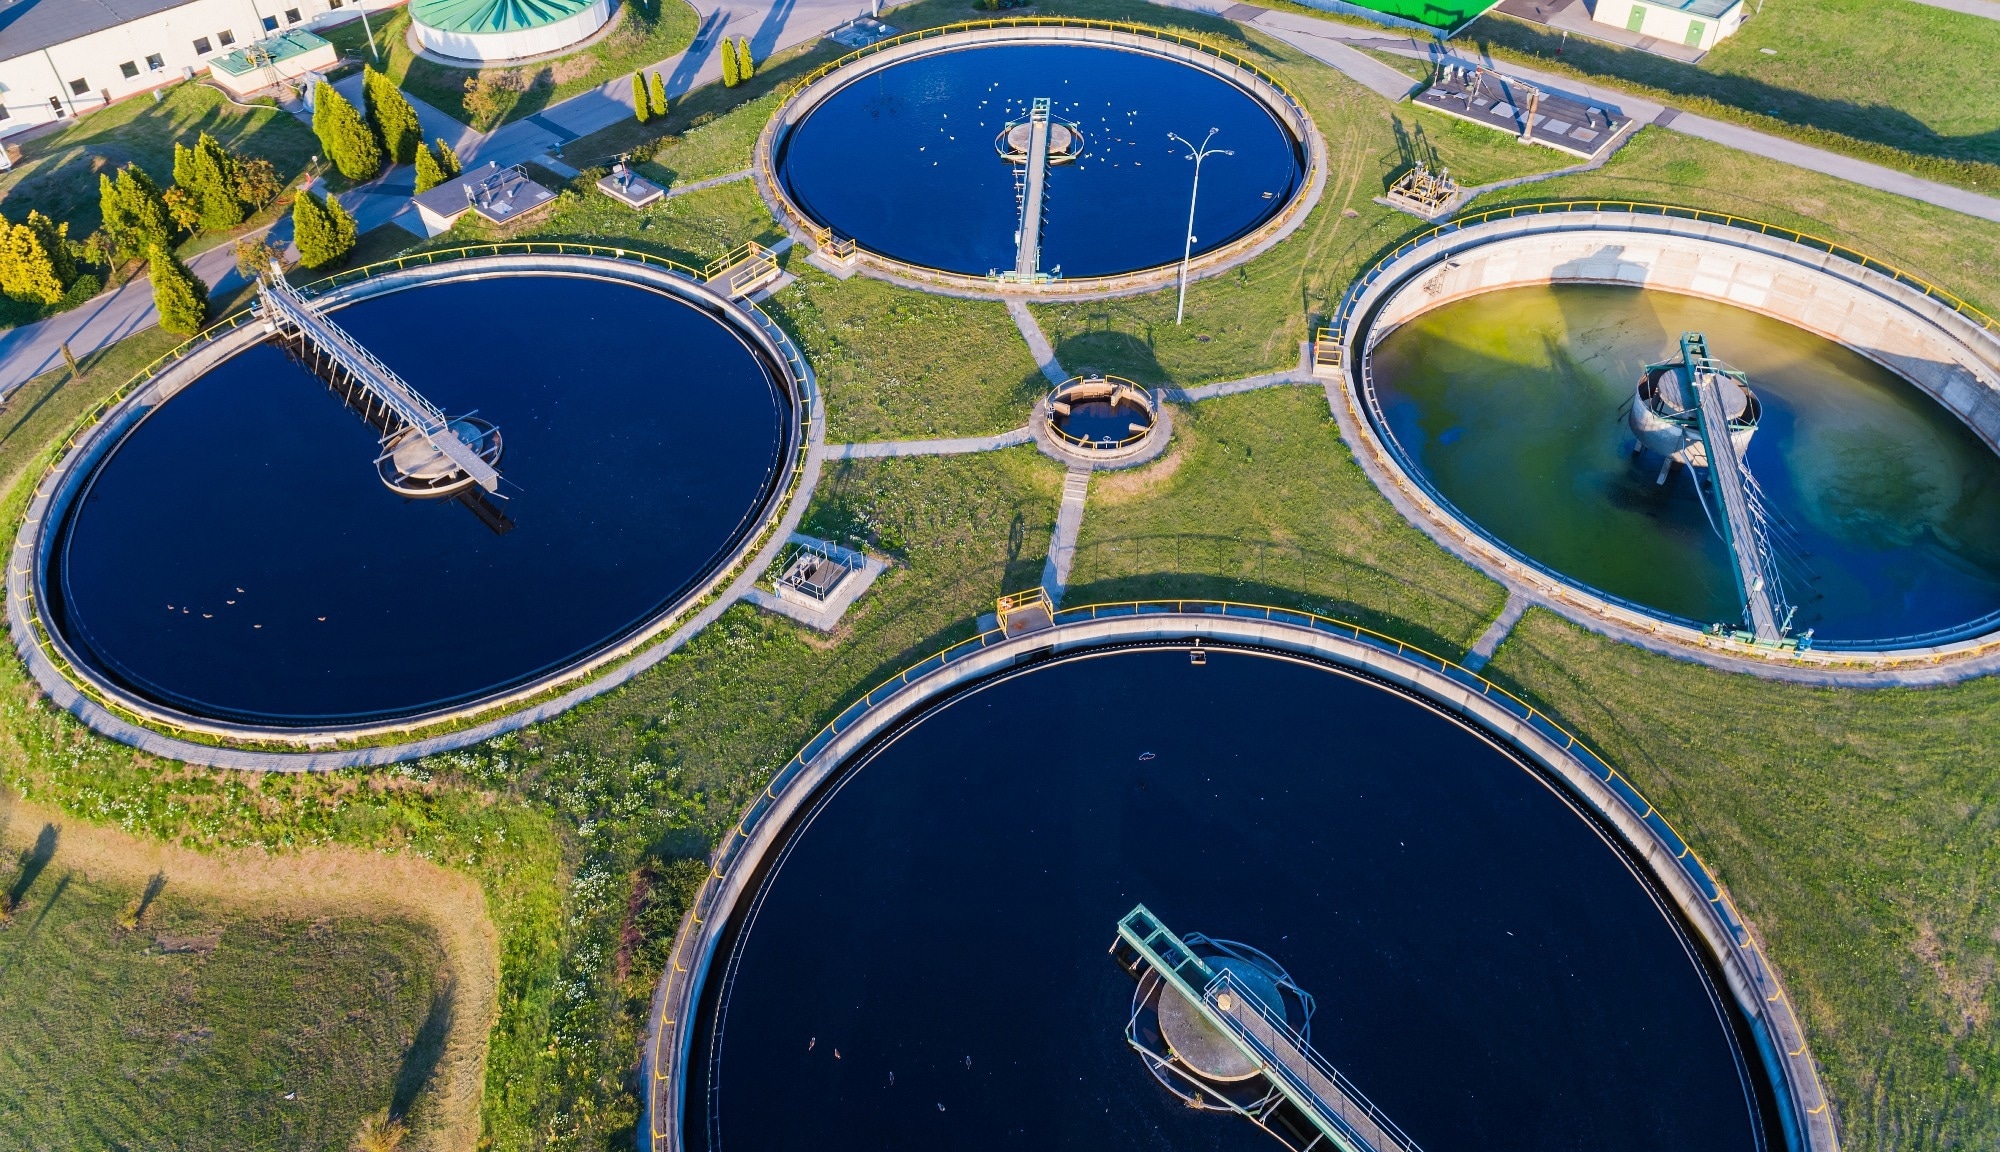 Study: Nationwide public perceptions regarding the acceptance of using wastewater for community health monitoring in the United States. Image Credit: Daniel Jedzura / Shutterstock